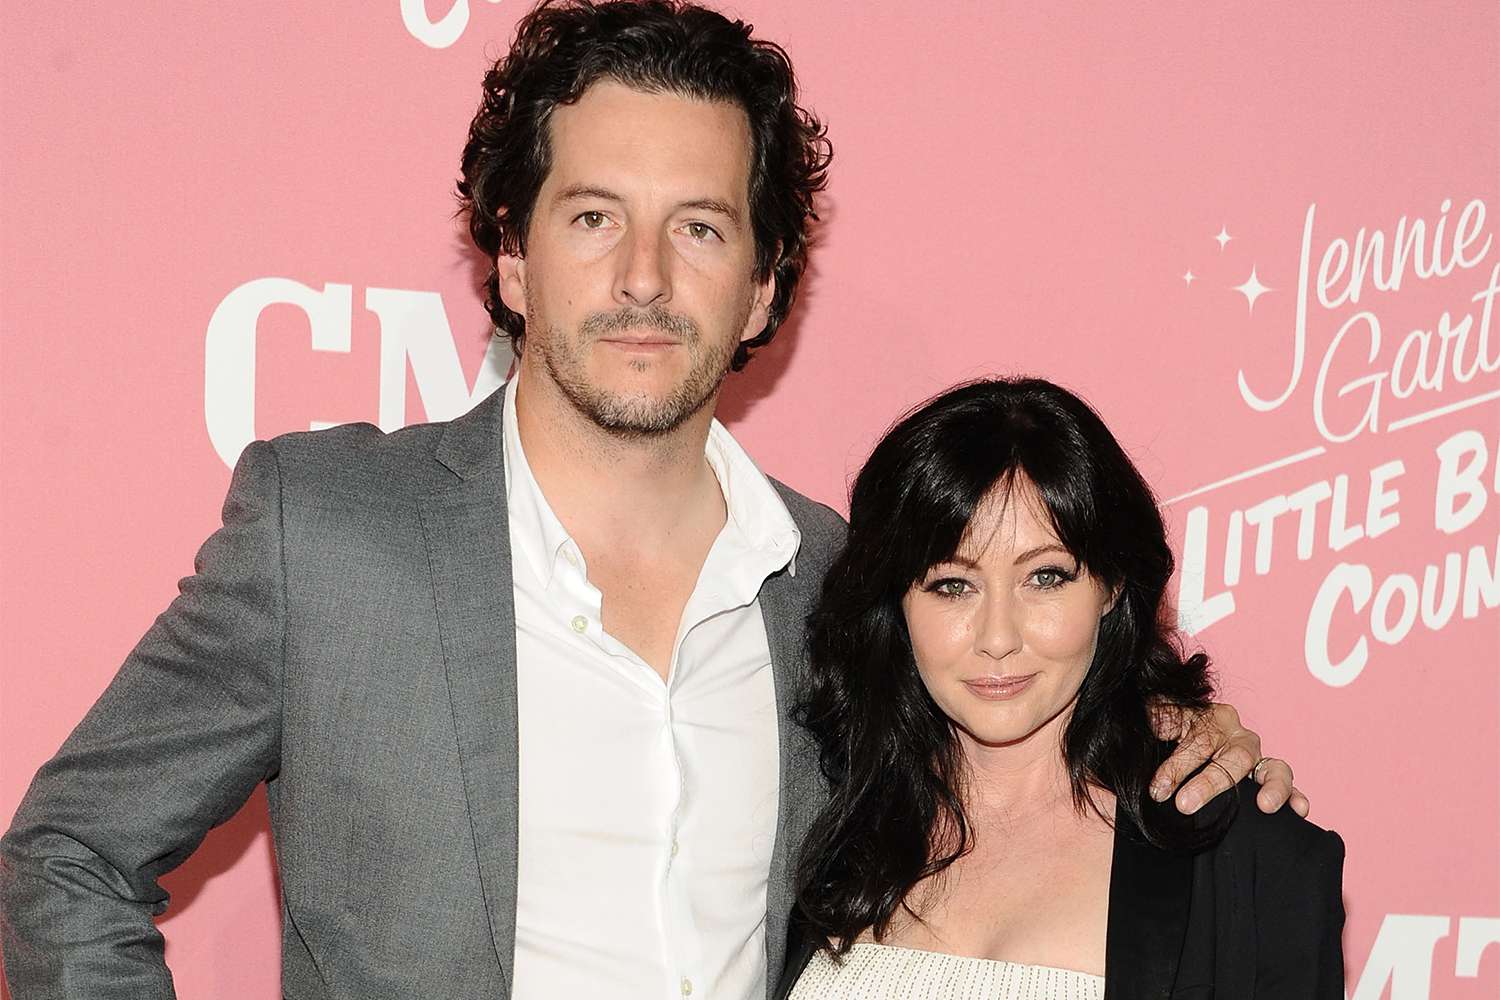 ‘He Shattered Her World’: Shannen Doherty ‘Refusing To Give’ Estranged Husband Kurt ‘a Dime’ In Bitter Divorce